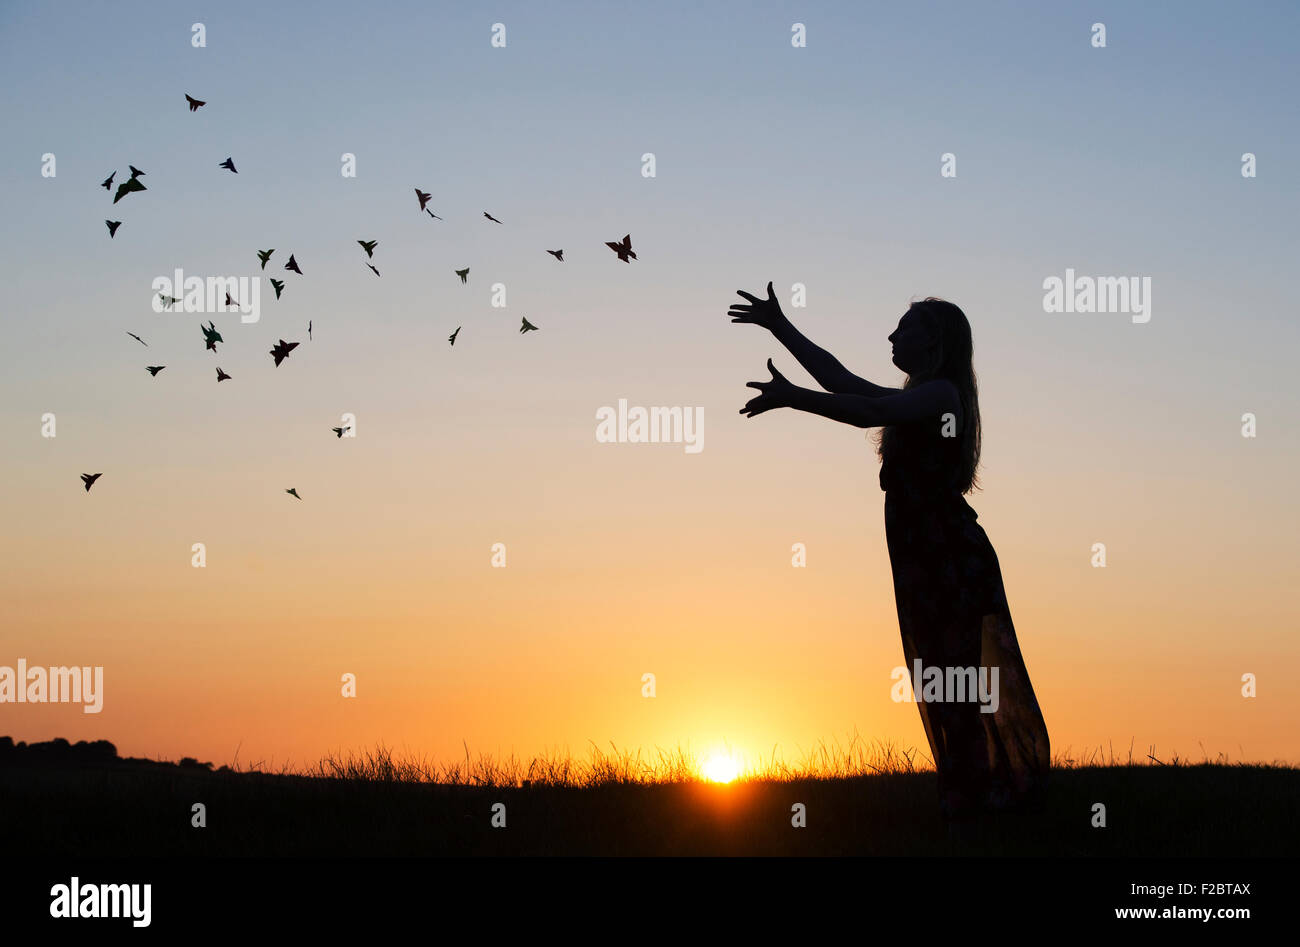 Teenage girl throwing origami butterflies in the air at sunset. Silhouette Stock Photo